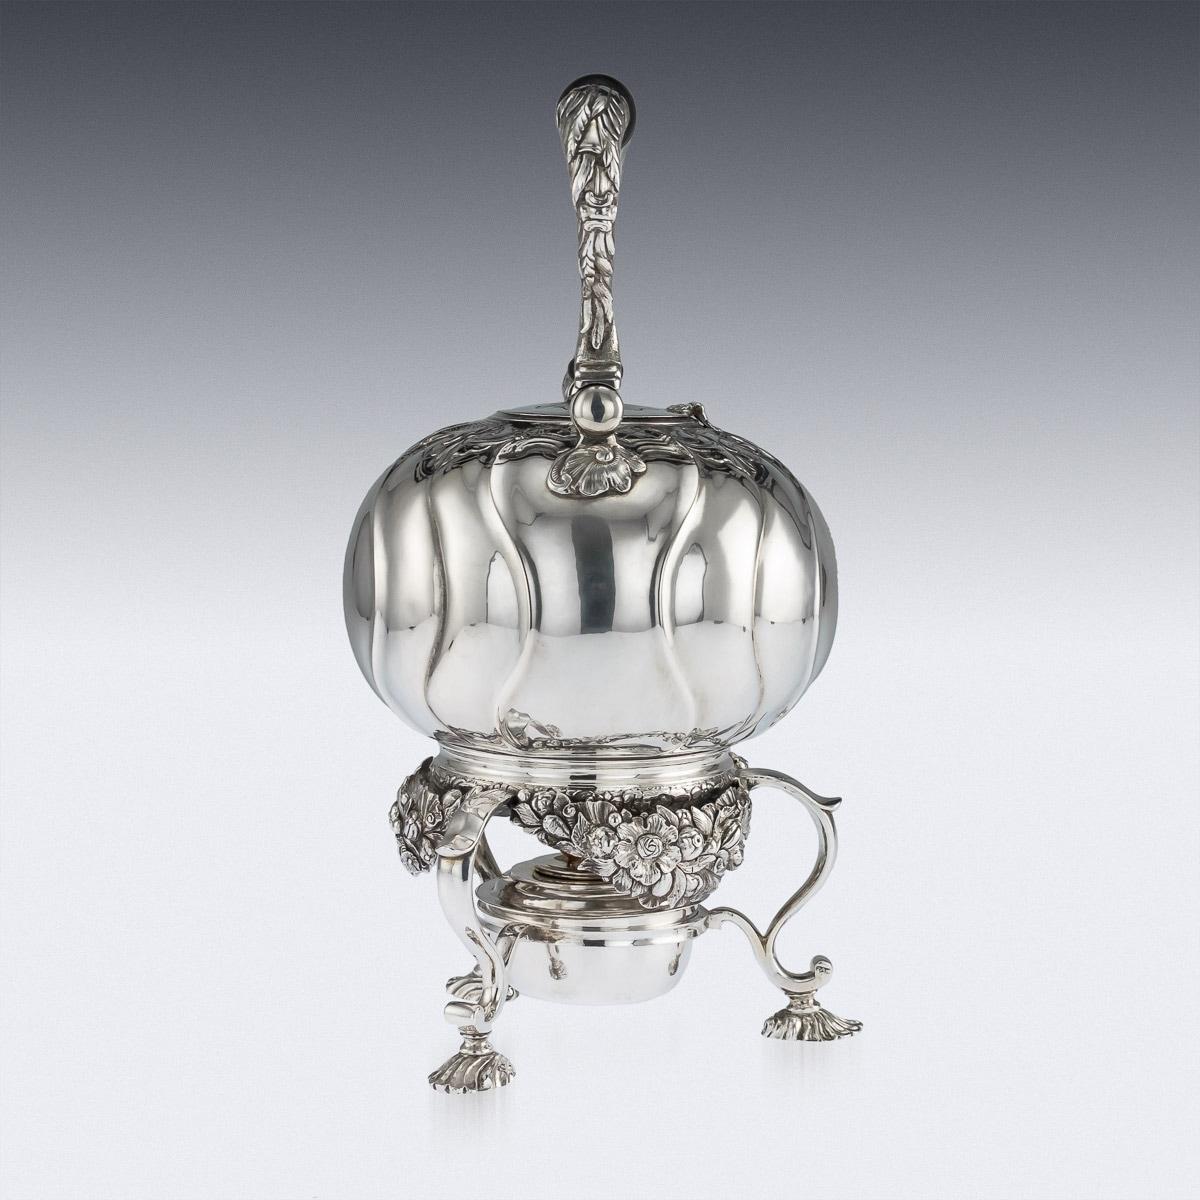 18th Century Imperial Russian silver tea kettle on stand, the bullet shaped body chased with rococo decoration and spiral bands, mounted with a turned wood swing handle and knop, the stand applied with cast floral apron, the burner within three